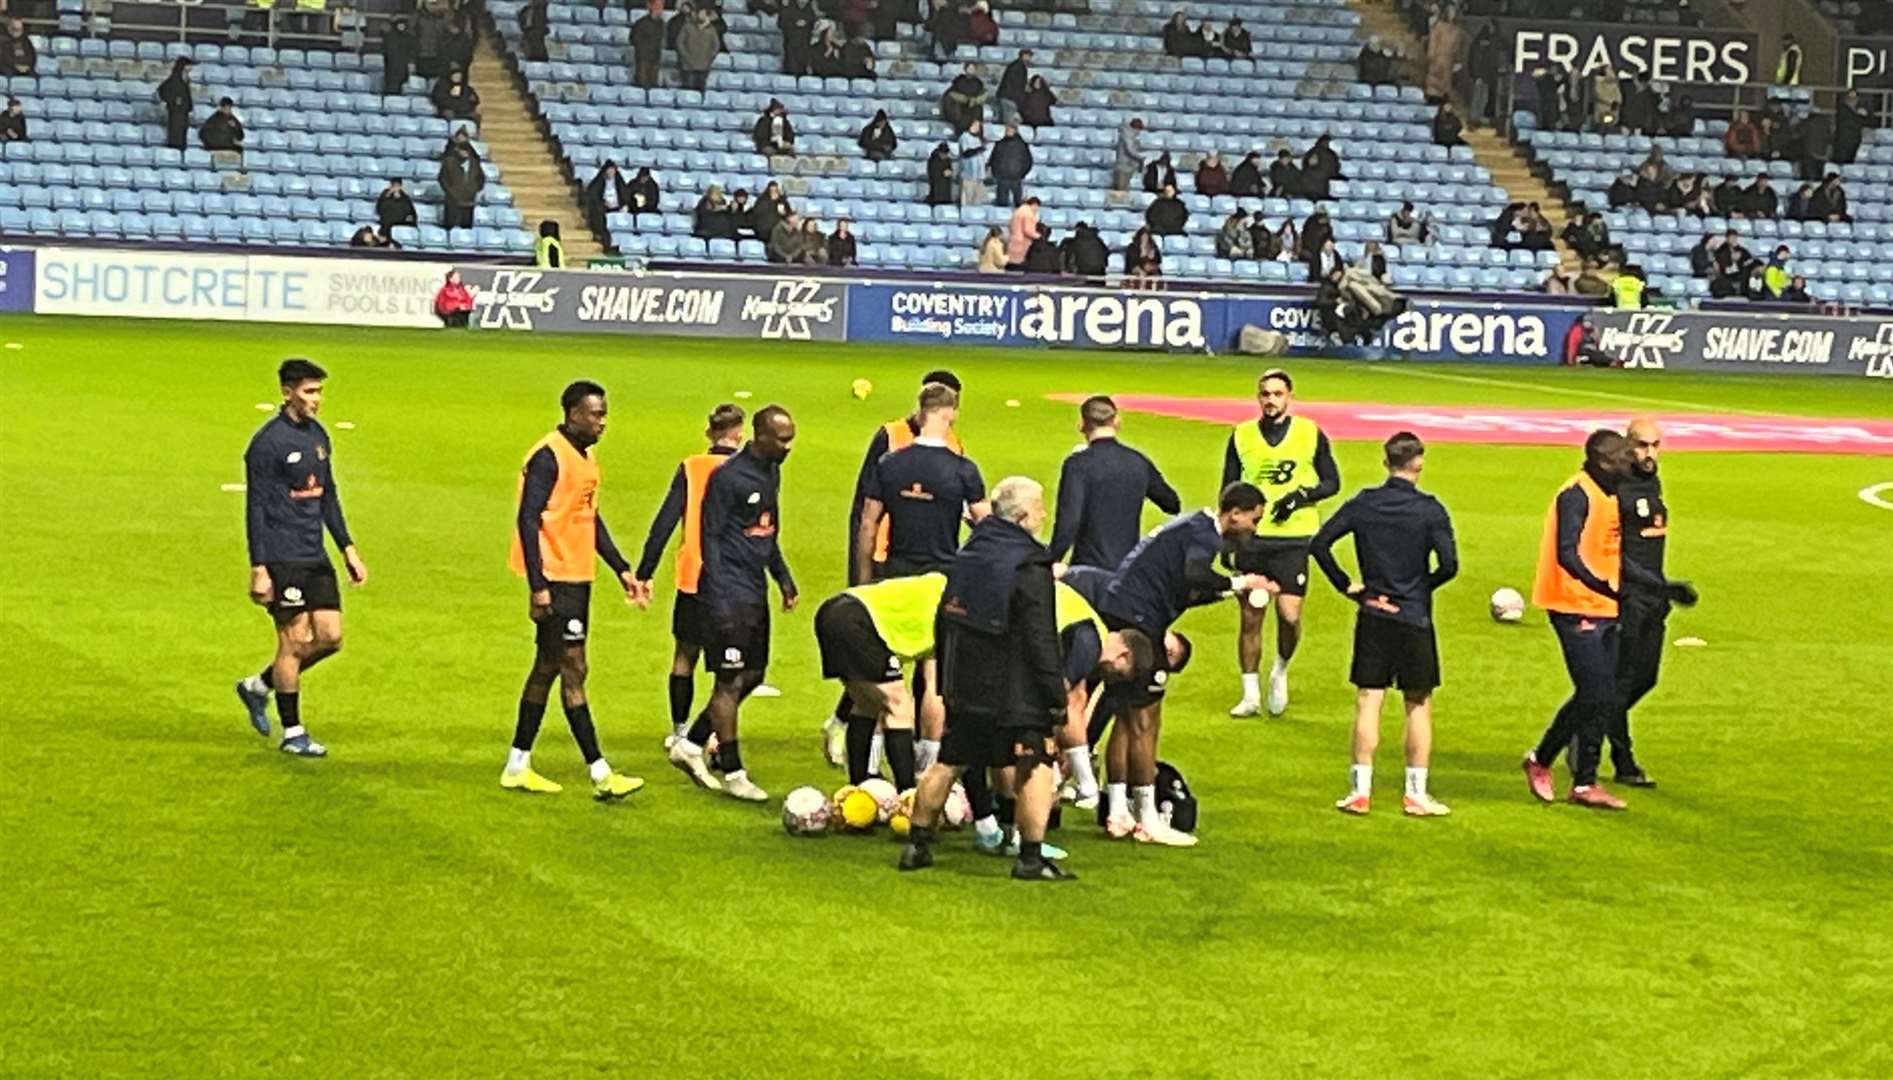 Warm-ups are under way at Coventry for tonight's FA Cup tie.